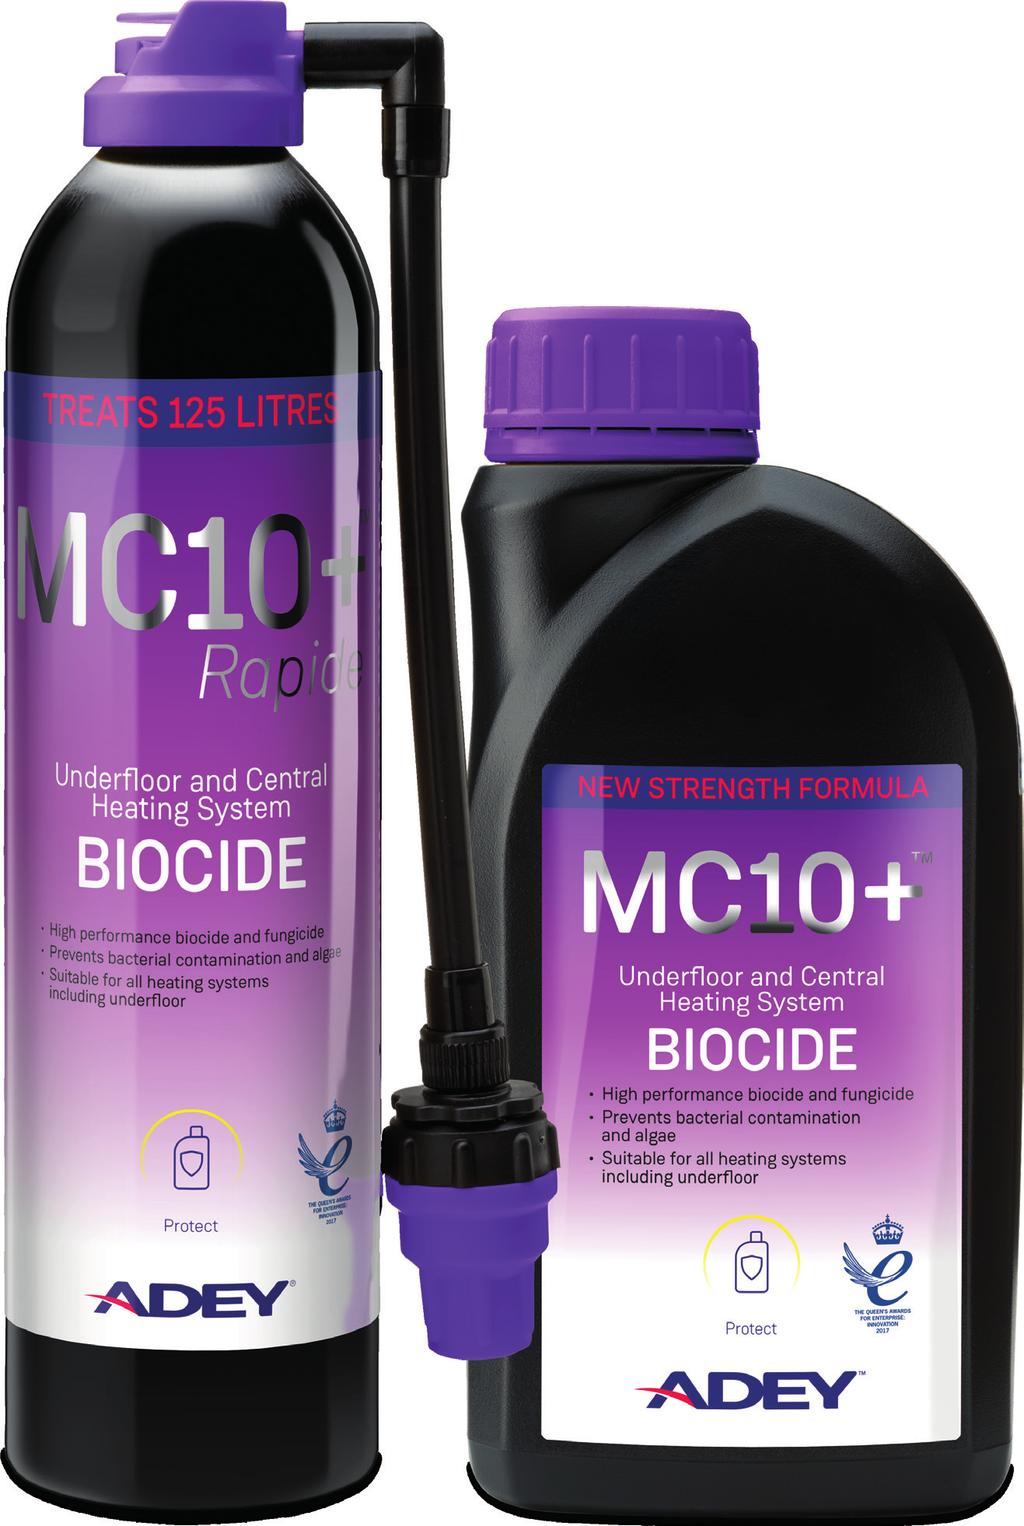 Underfloor and Central Heating System BIOCIDE MC10+ is a concentrated, dual biocide formulated to prevent the formation and growth of bacterial contamination, algae and micro-organisms in underfloor